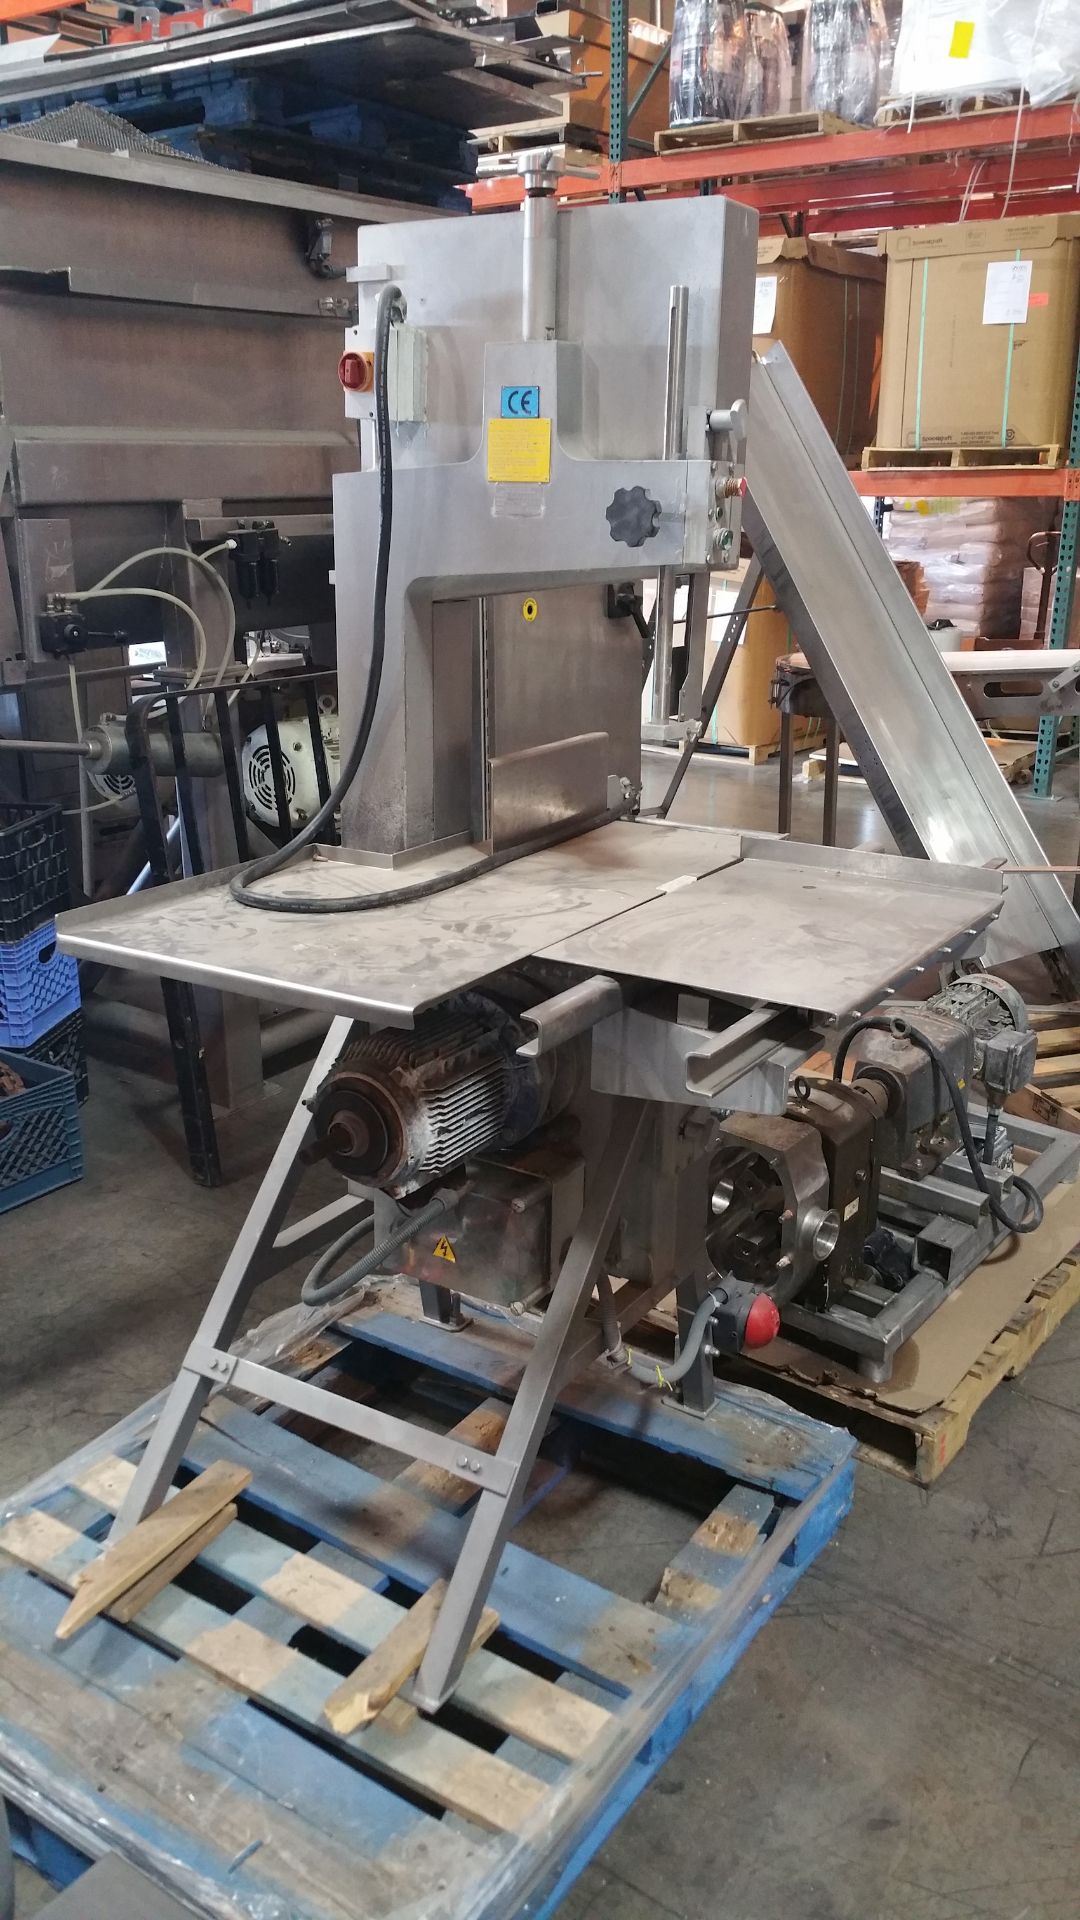 AEW all S/S Construction Band Saw with 3HP Motor Model 400M S/N LHS332896 (Located in Nevada) - Image 2 of 3